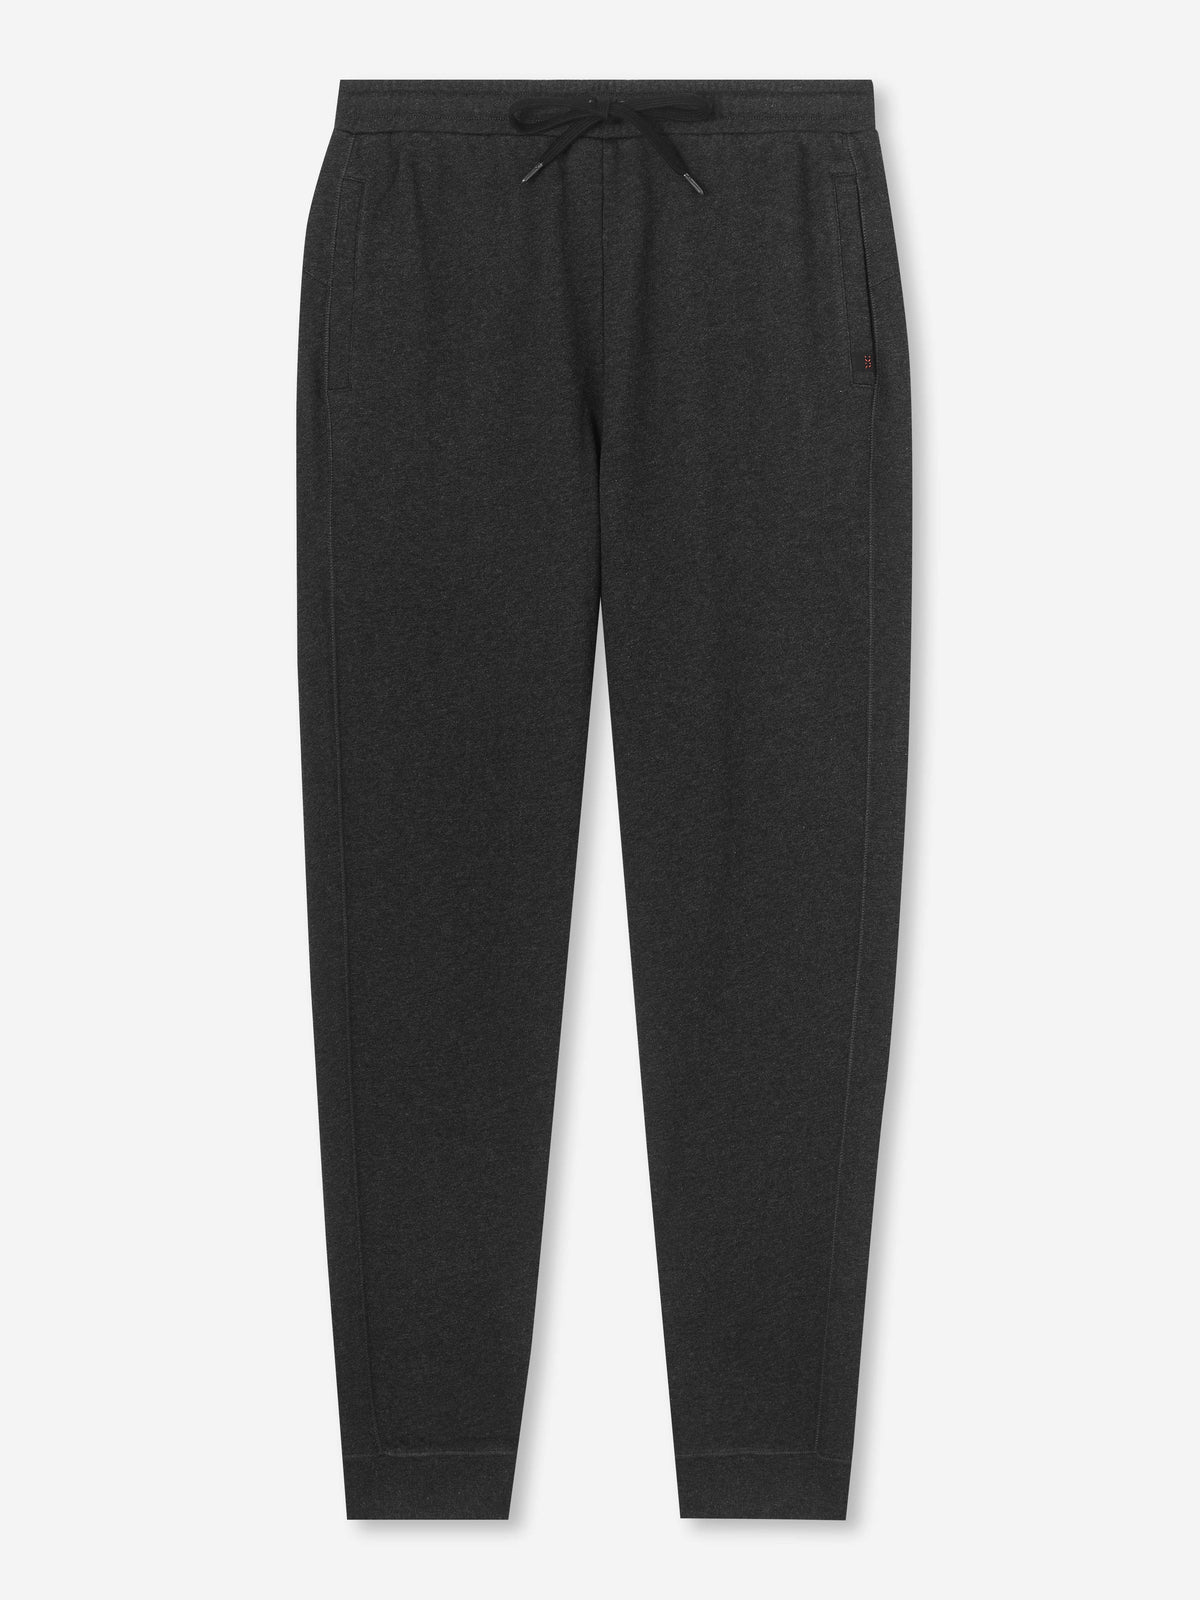 Rosewear Clothing Company Rose Bowl Track Pants Small